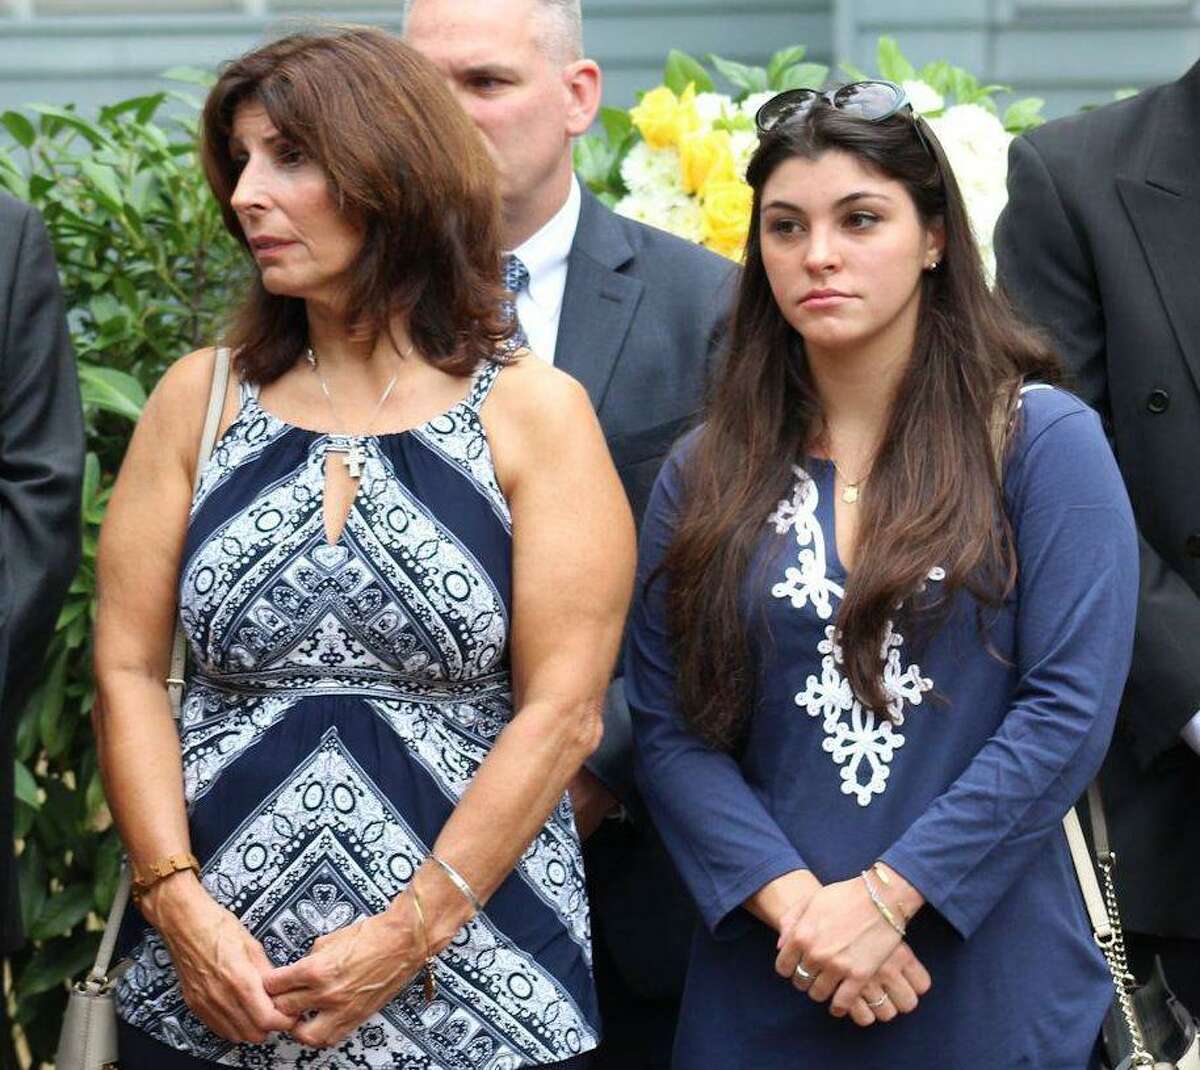 FILE: Roseanne Nelson (left) and her daughter Caitlin Nelson (right) at a 2016 9/11 ceremony held to honor her father, James A. Nelson, who was killed in the 2001 terrorist attack when Caitlin was 5-years-old. Caitlin Nelson, 21, of Clark, NJ, died Sunday, April 2, 2017 from complications following a campus event.